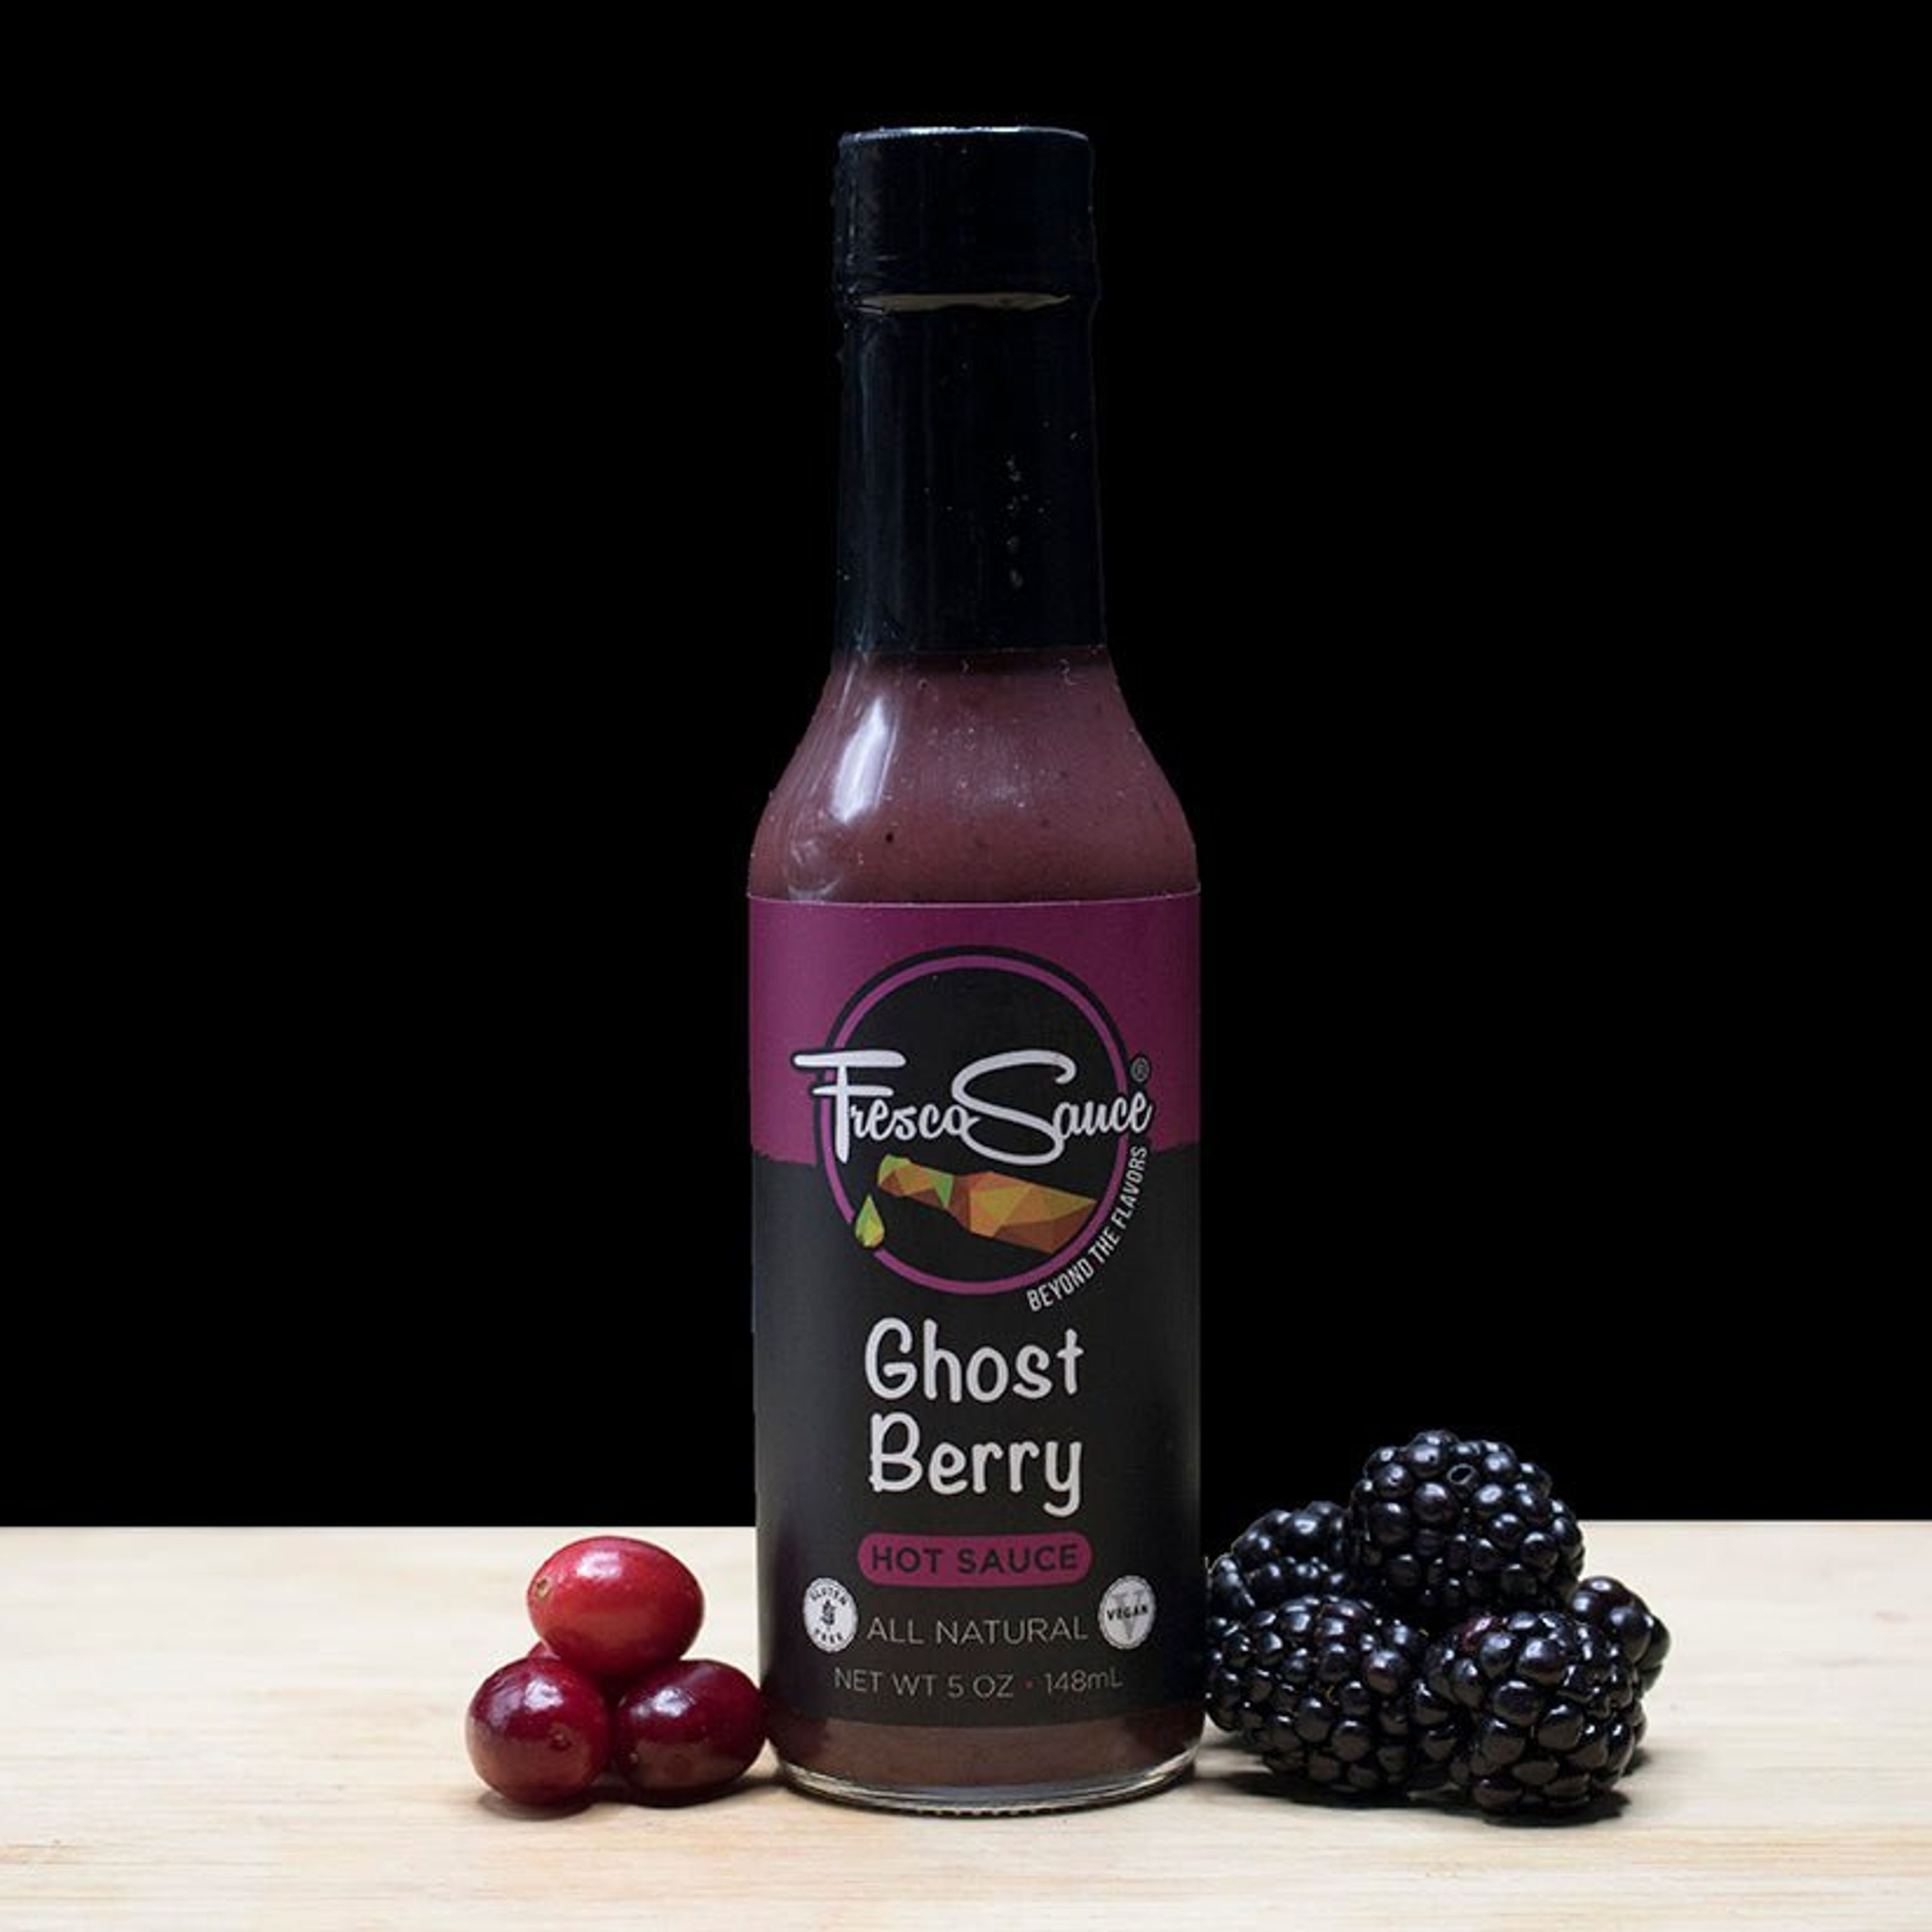 Ghost Berry Hot Sauce